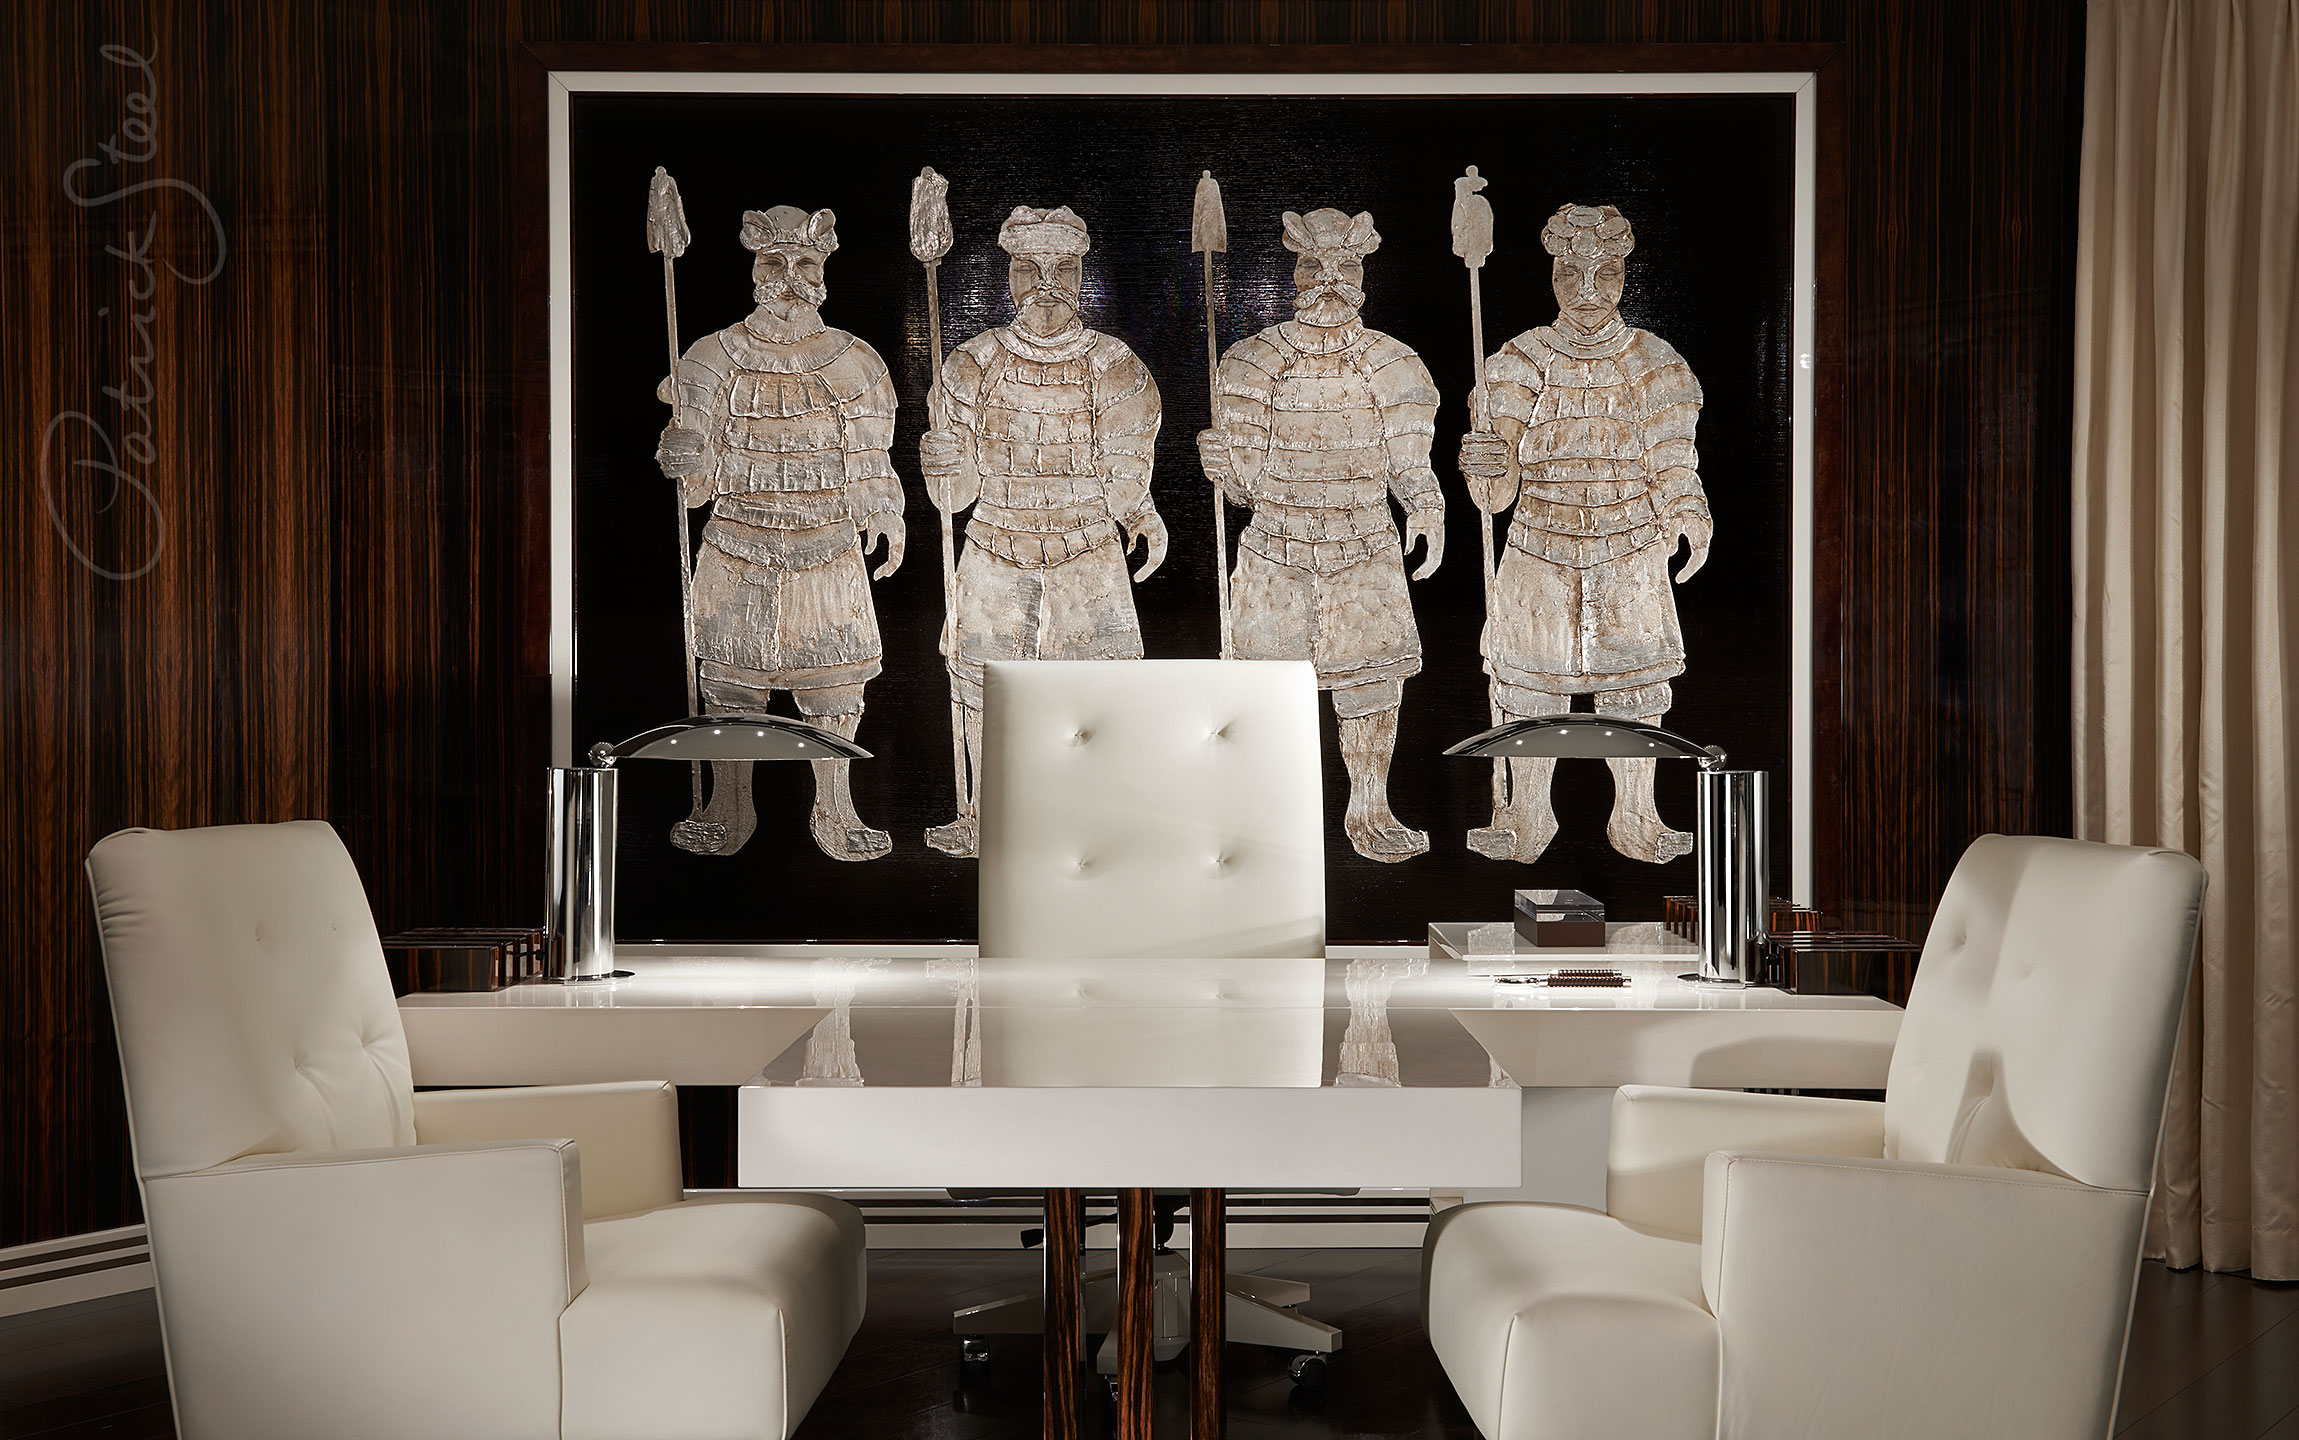 Mr Steel | One Hyde Park | Interior design by Candy & Candy